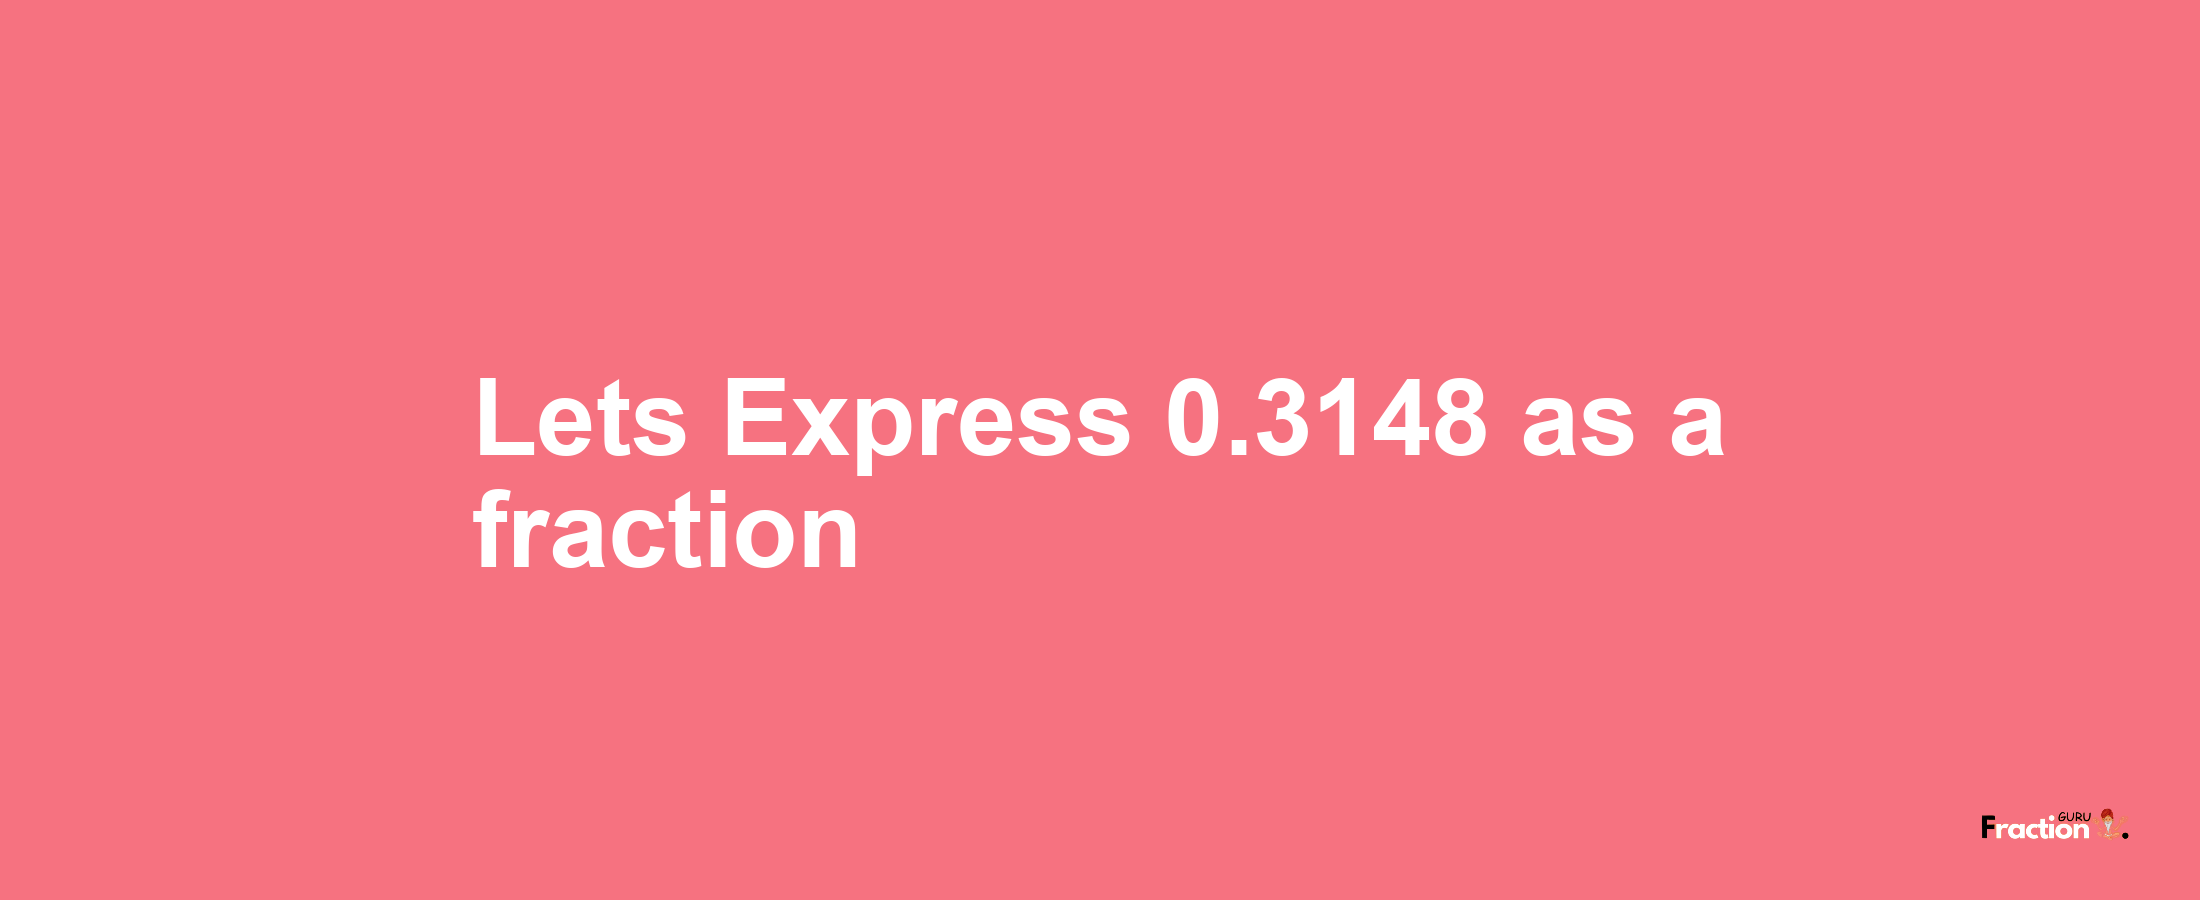 Lets Express 0.3148 as afraction